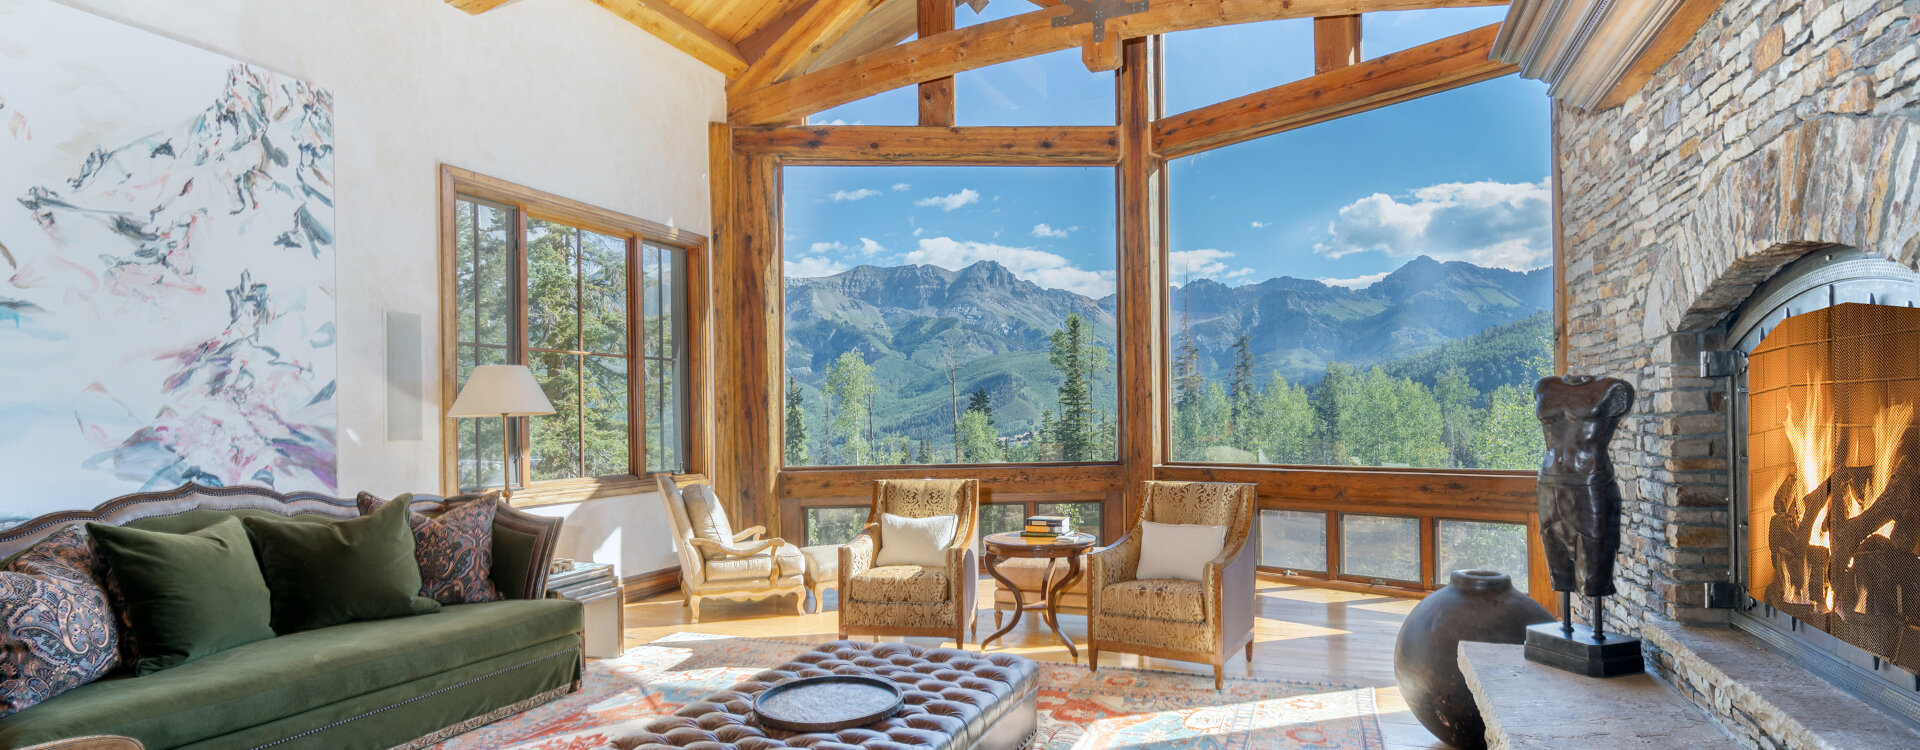 2.02-telluride-picture-perfect-living-room-view2